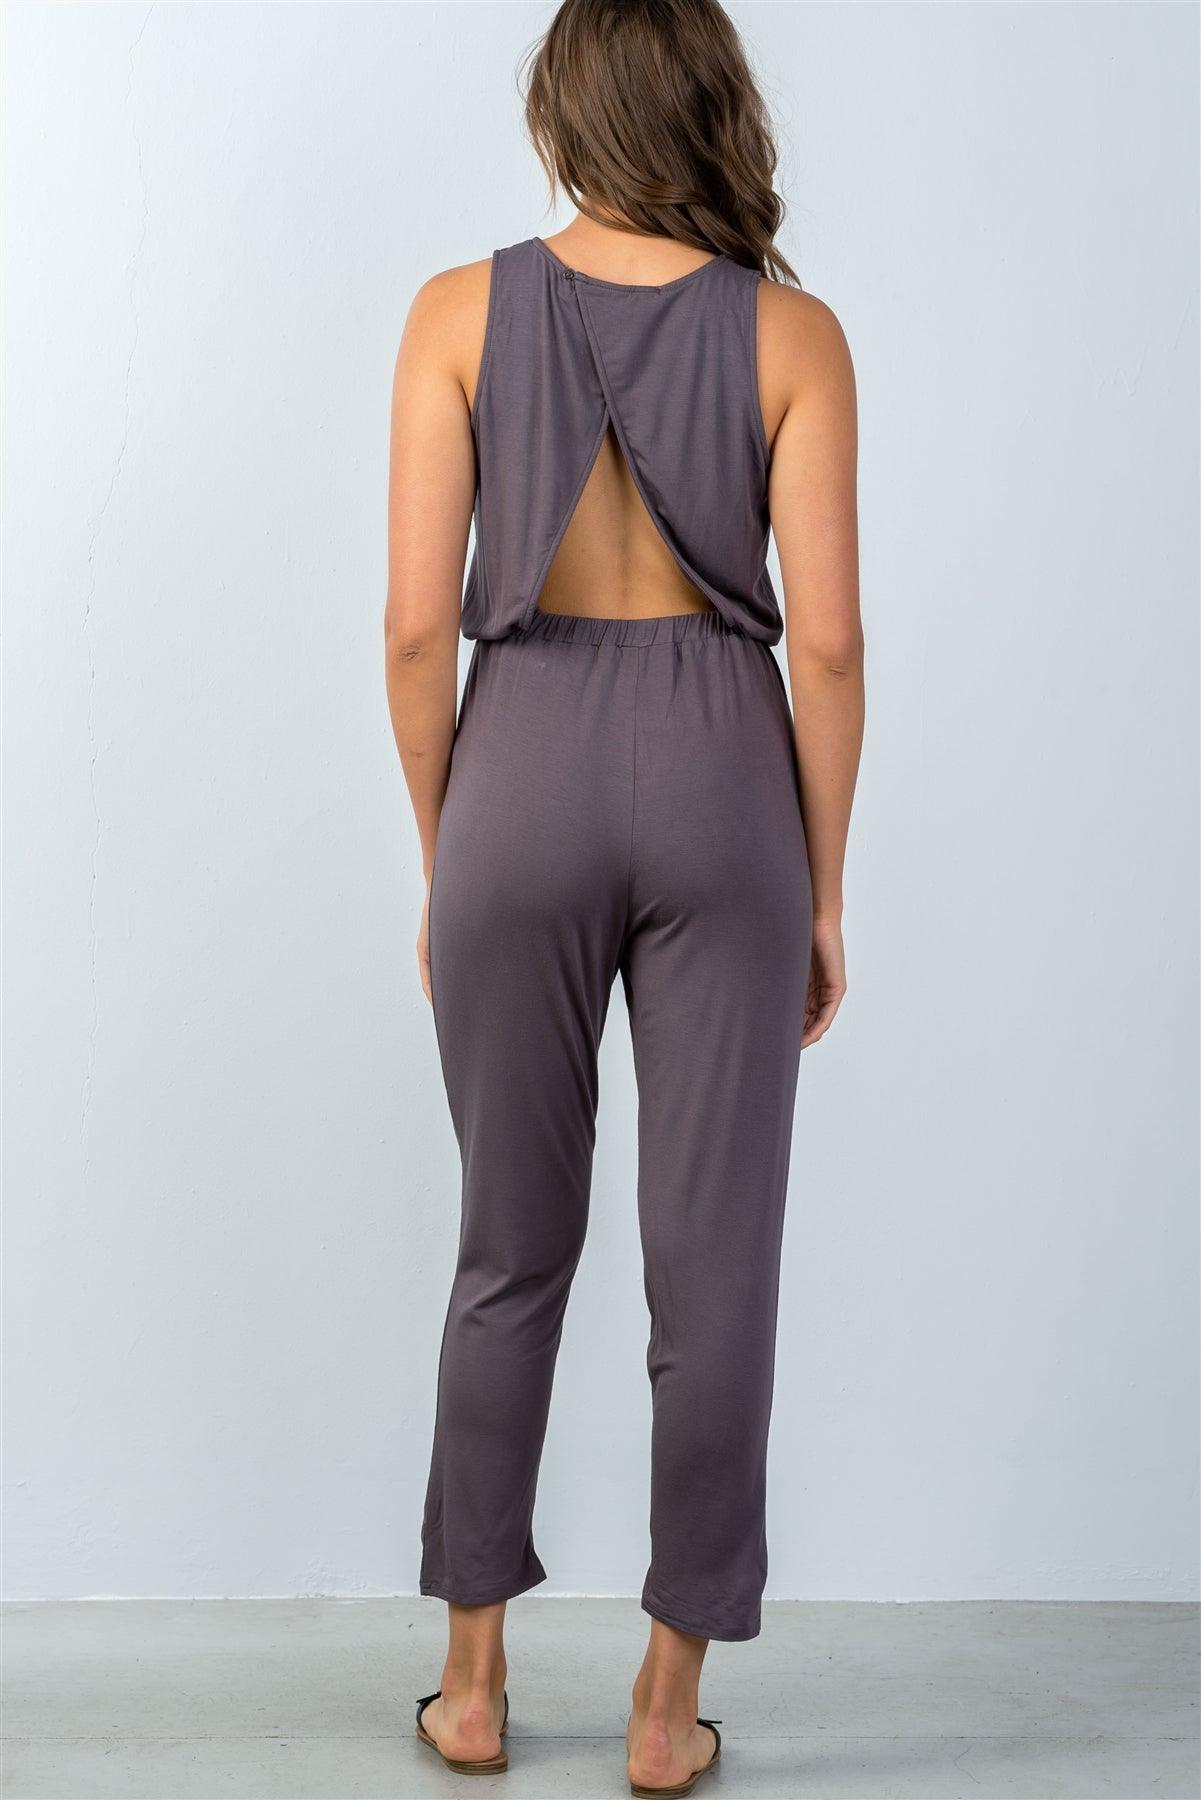 Charcoal Sleeveless Back Cut Out Jumpsuit /3-2-1